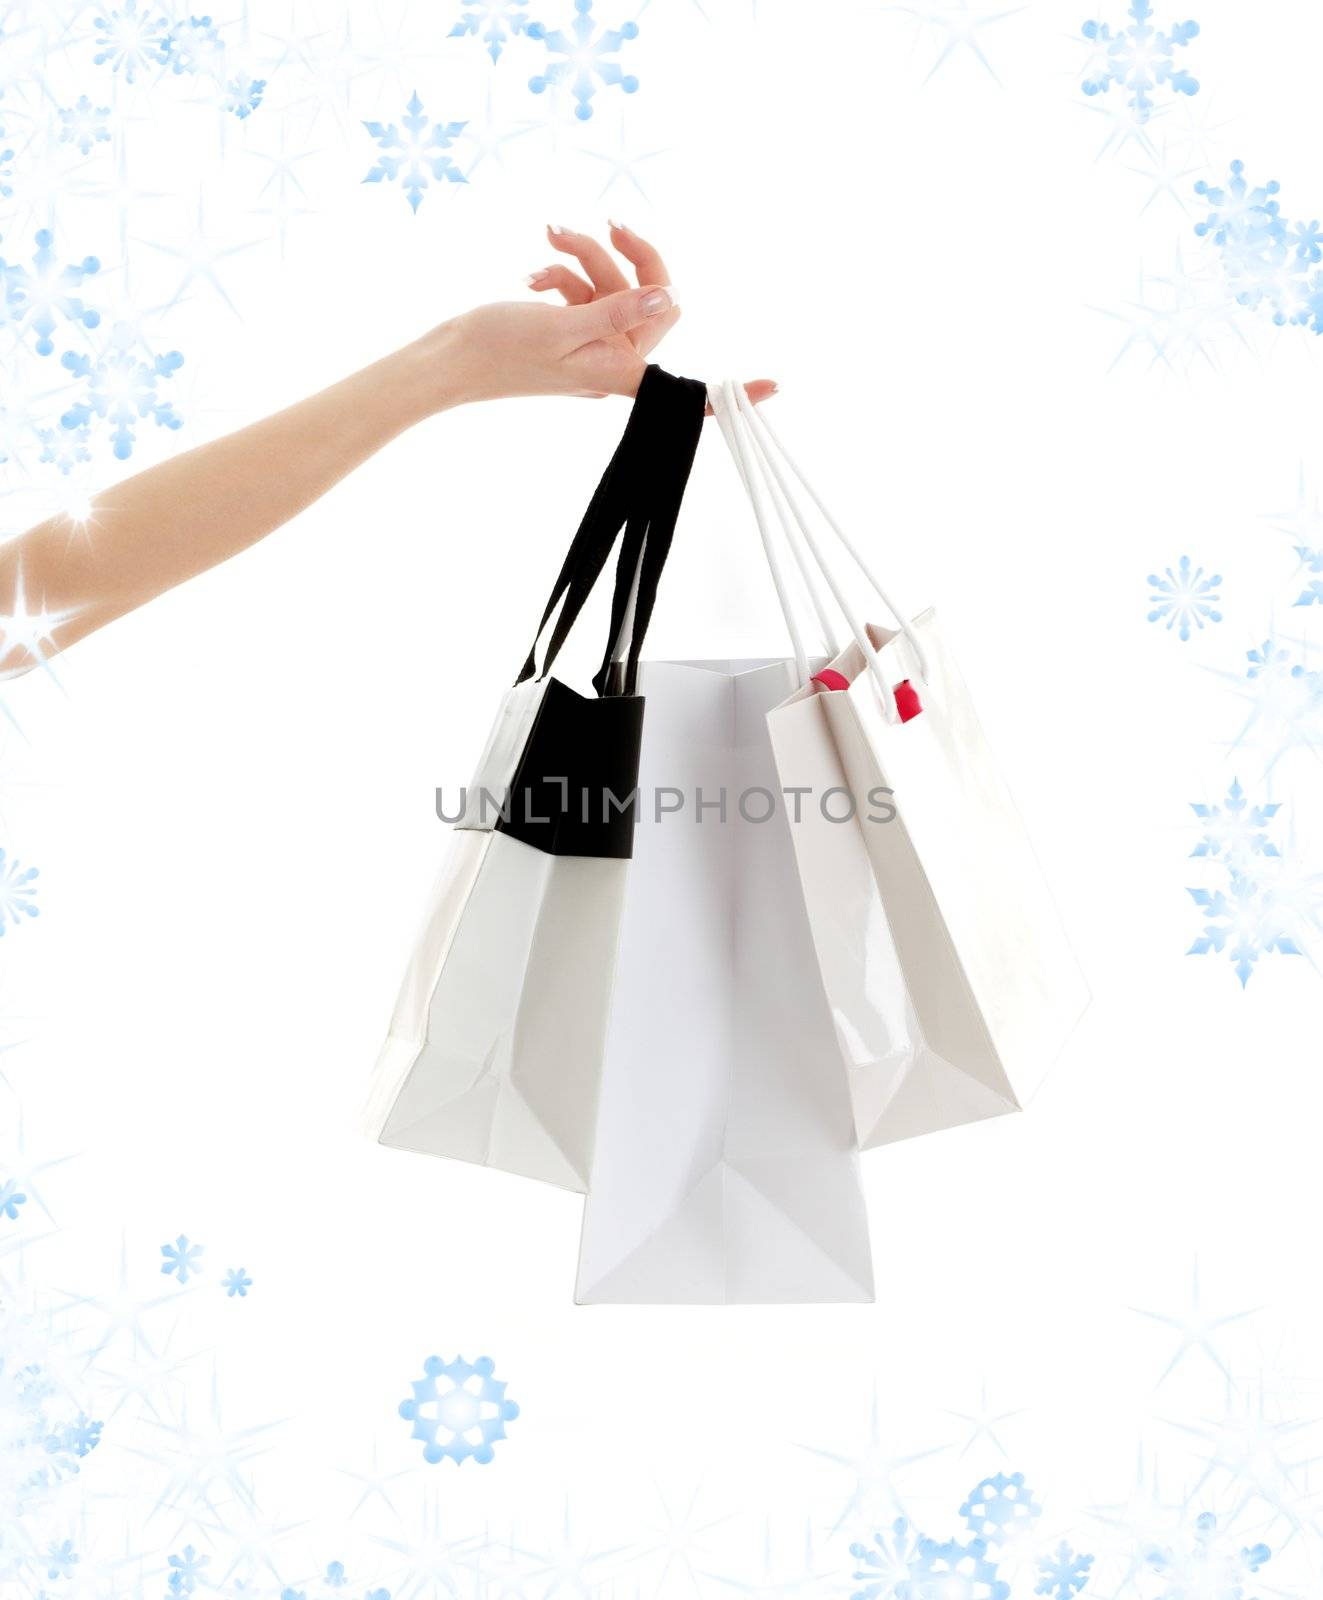 hand with three shopping bags and snowflakes